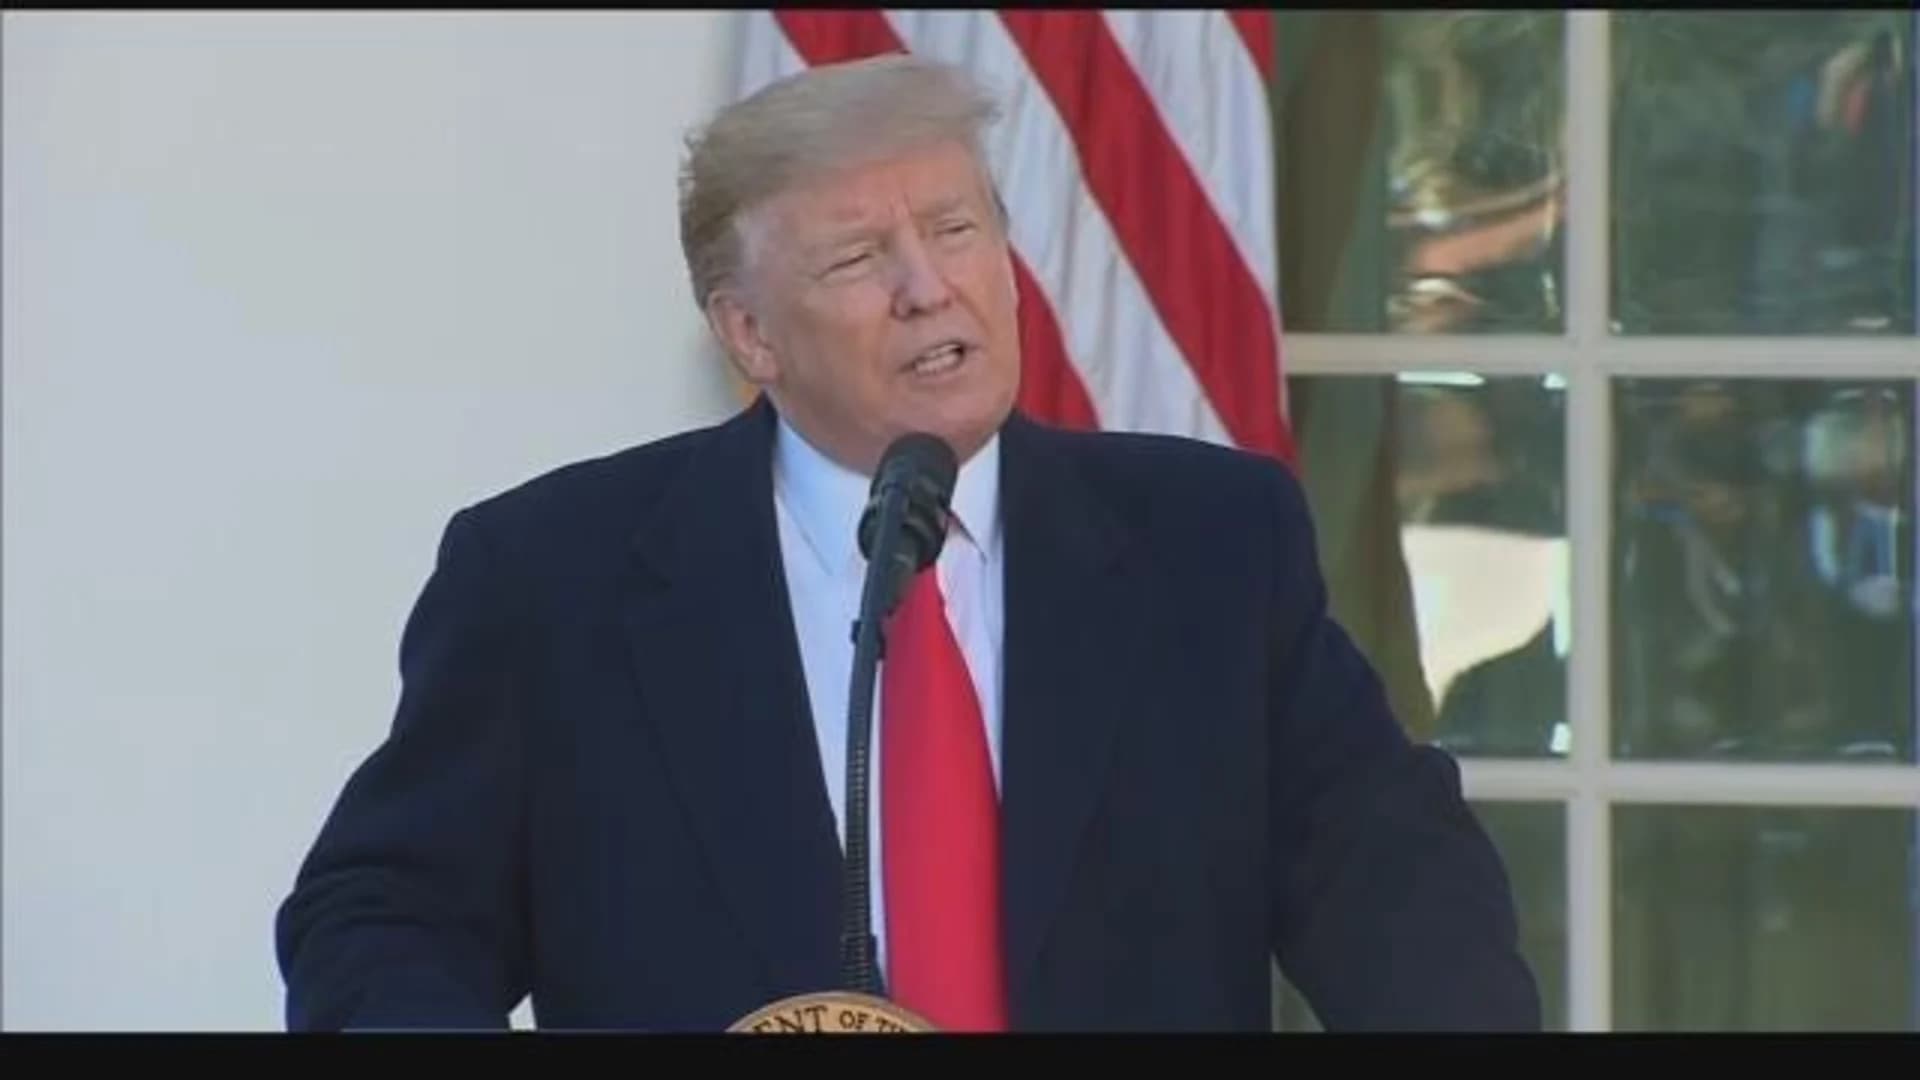 President Trump makes border security announcement - Live Coverage